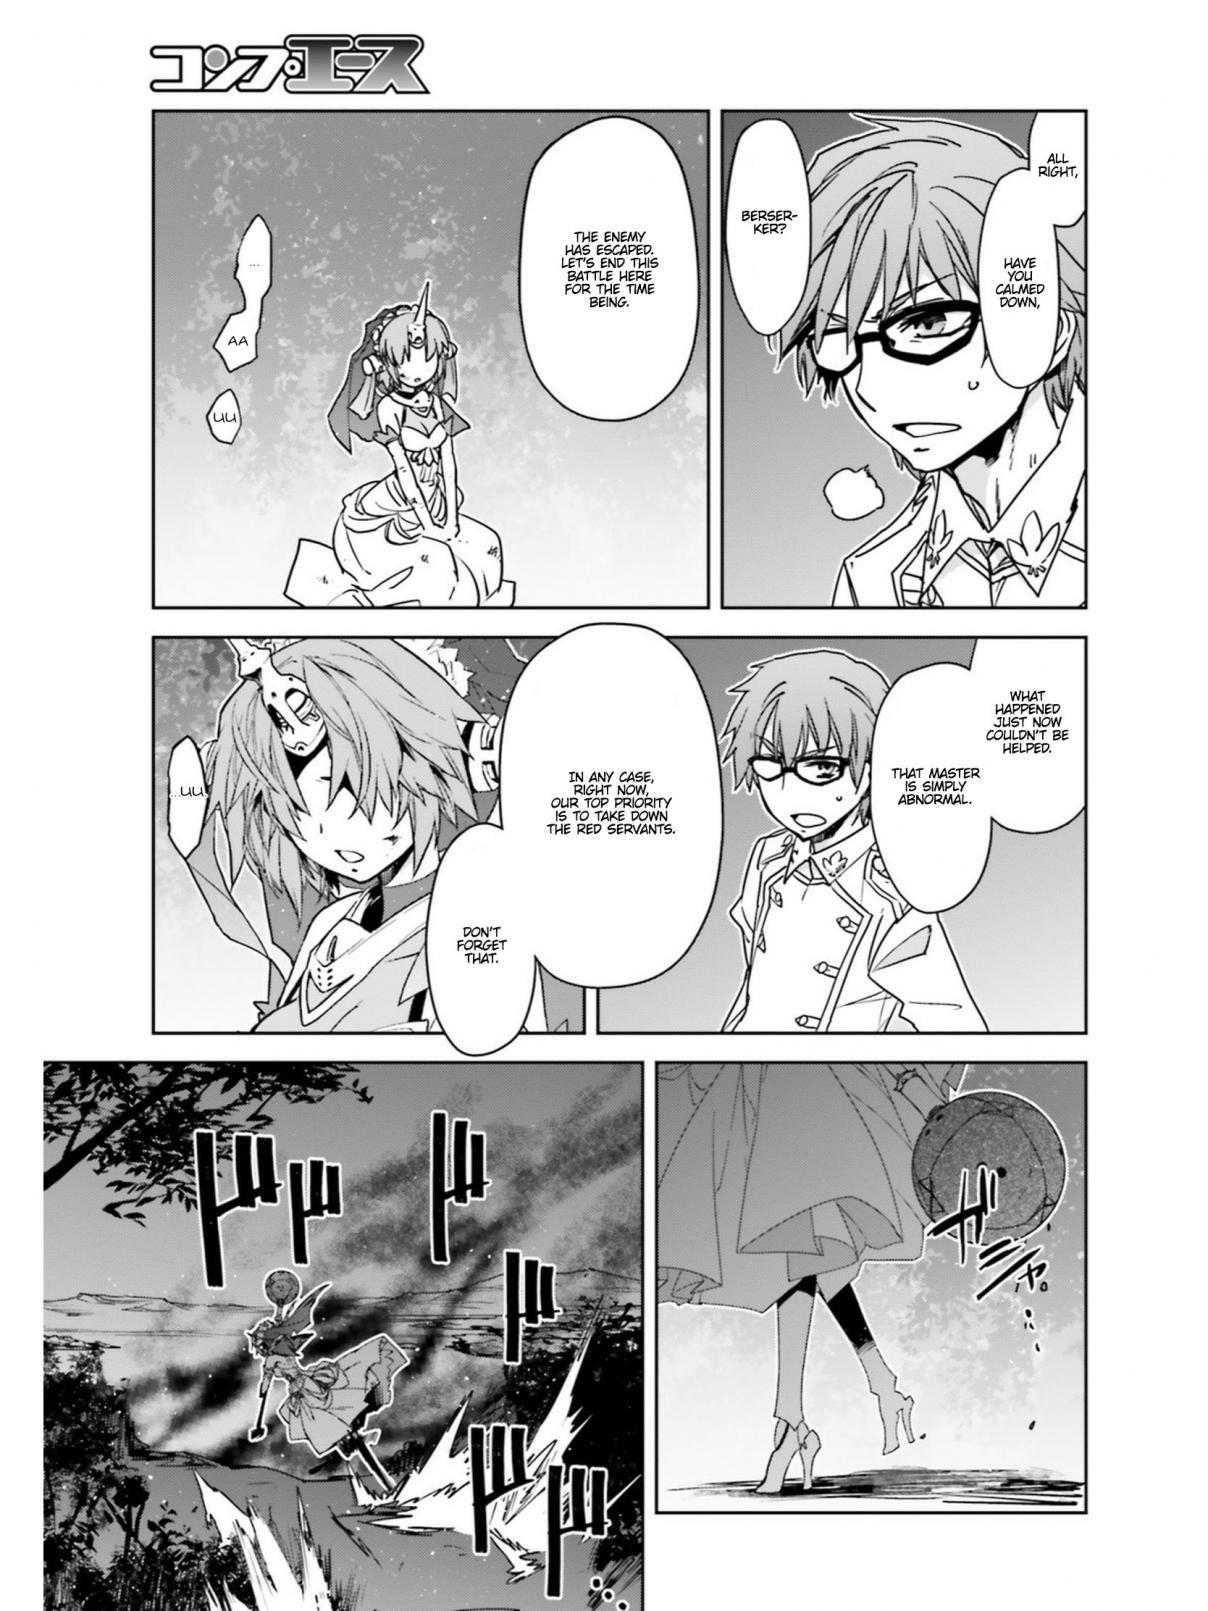 Fate/Apocrypha Ch. 23 Episode